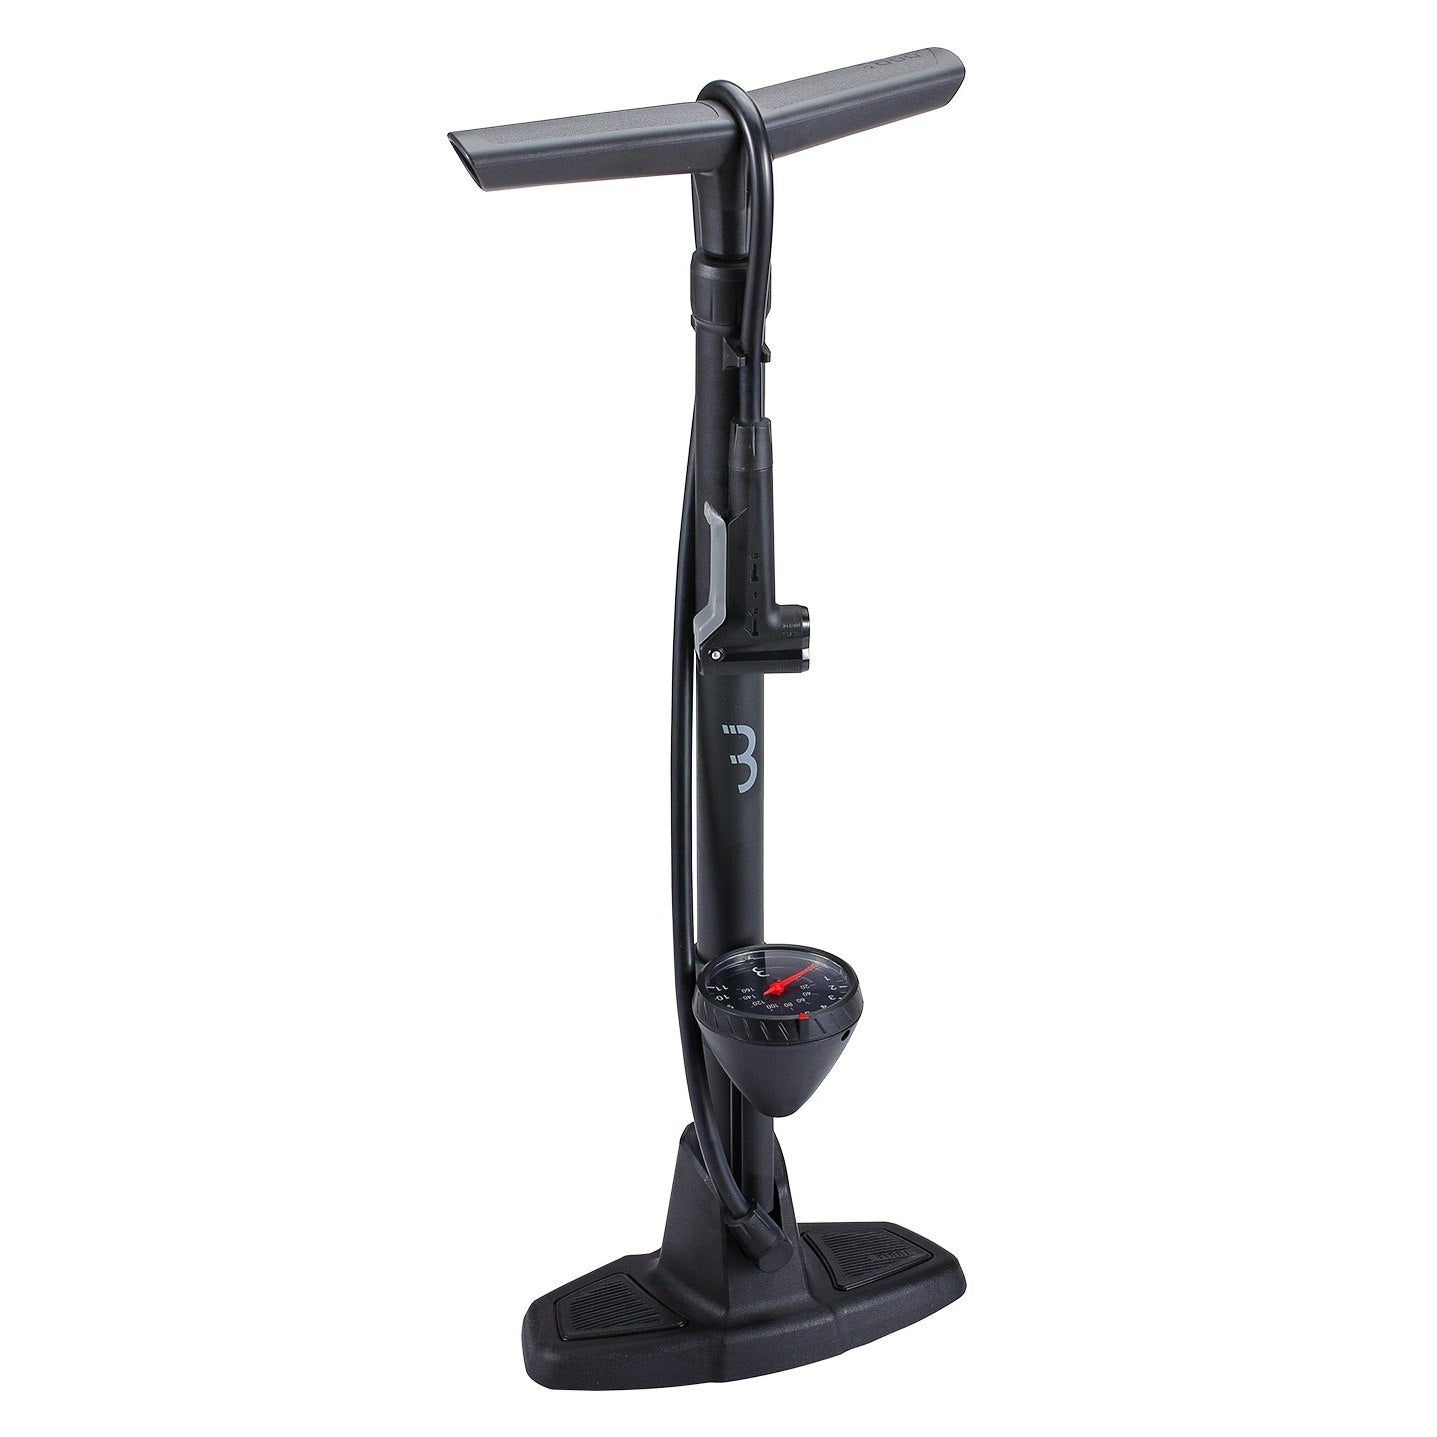 BBB Cycling AirWave BFP-20 Track Pump-Bicycle Pumps-BBB-Chain Driven Cycles-Bike Shop-Ireland